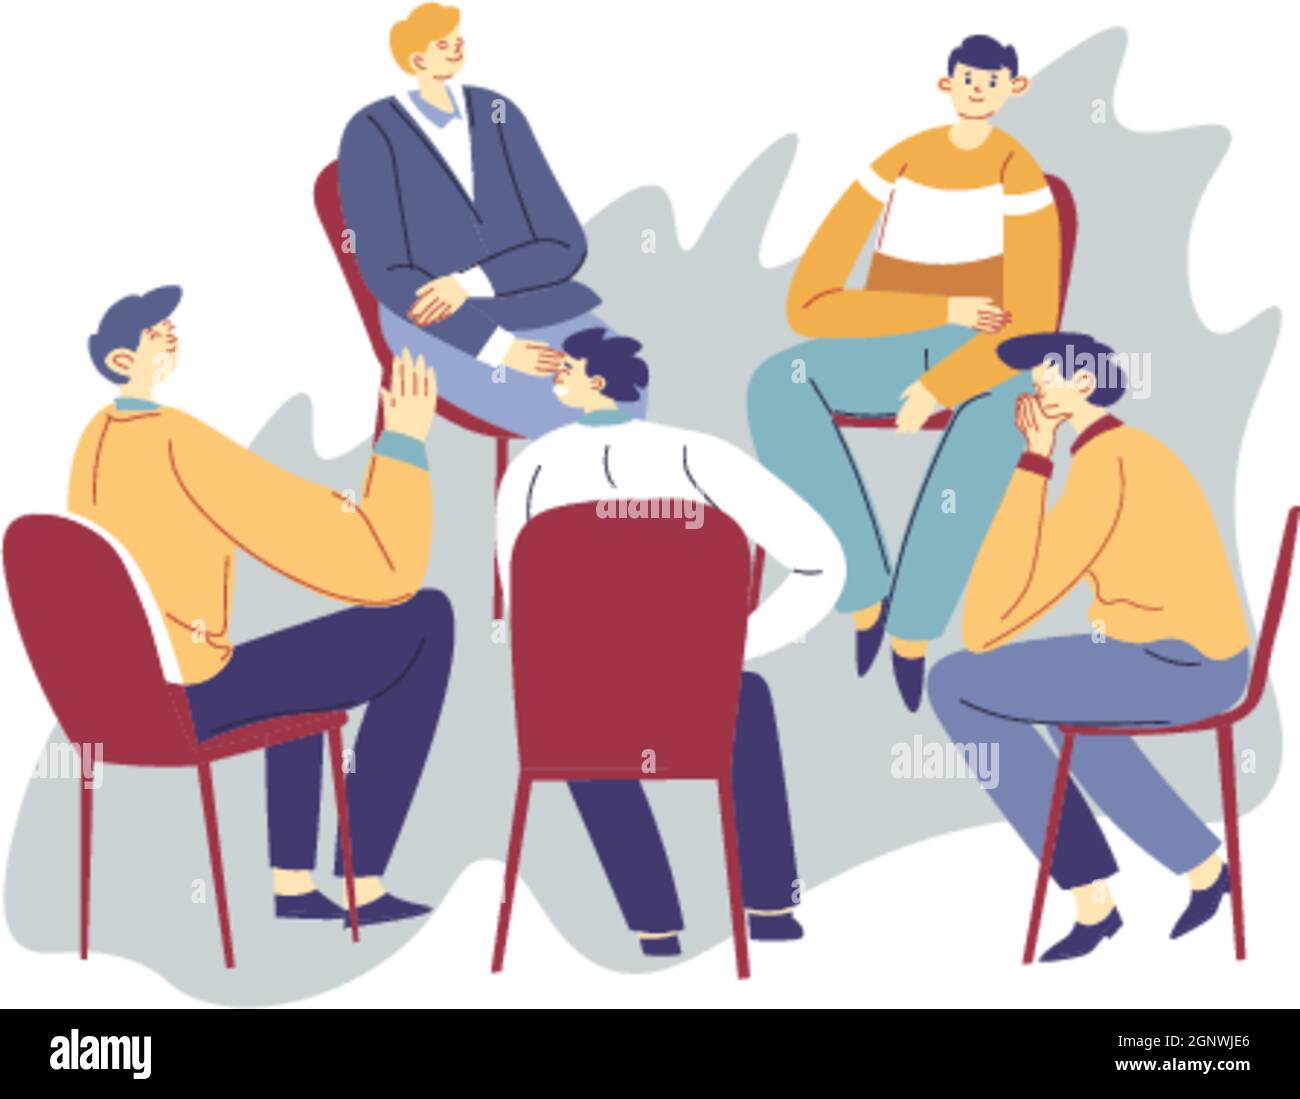 Session or group therapy people talking problems Stock Vector